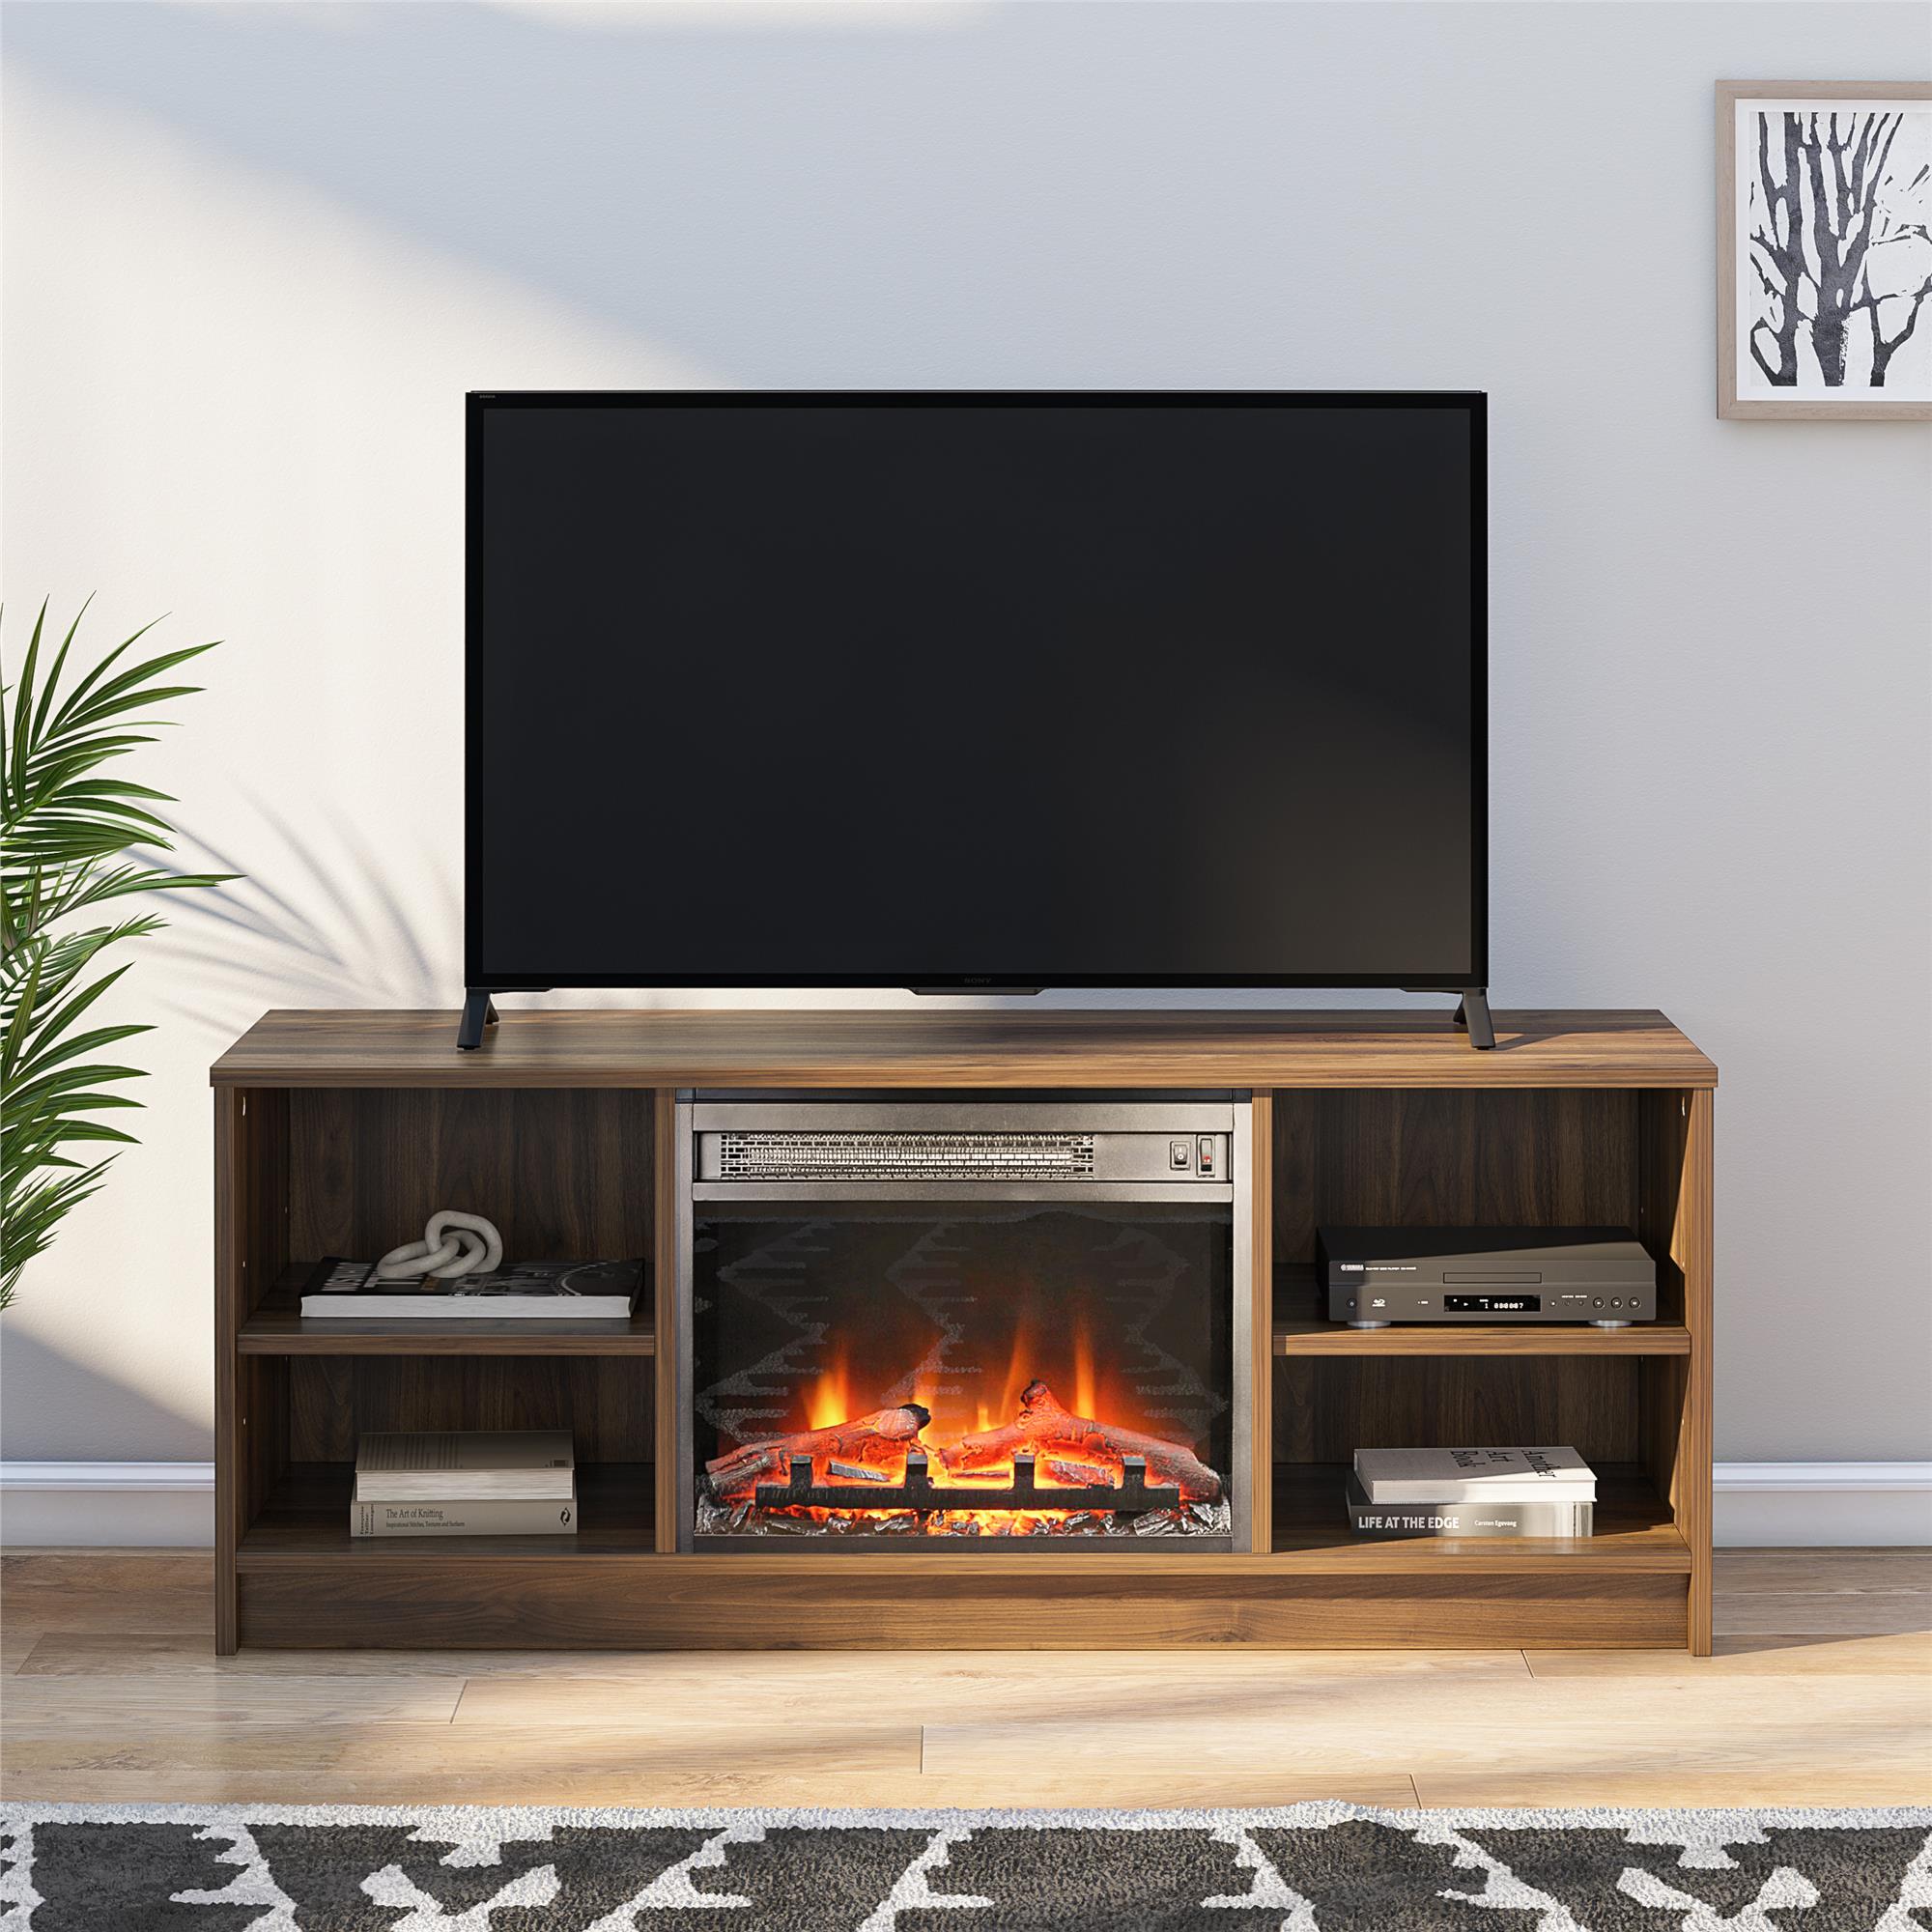 Mainstays Fireplace TV Stand, for TVs up to 55", Walnut - image 2 of 12